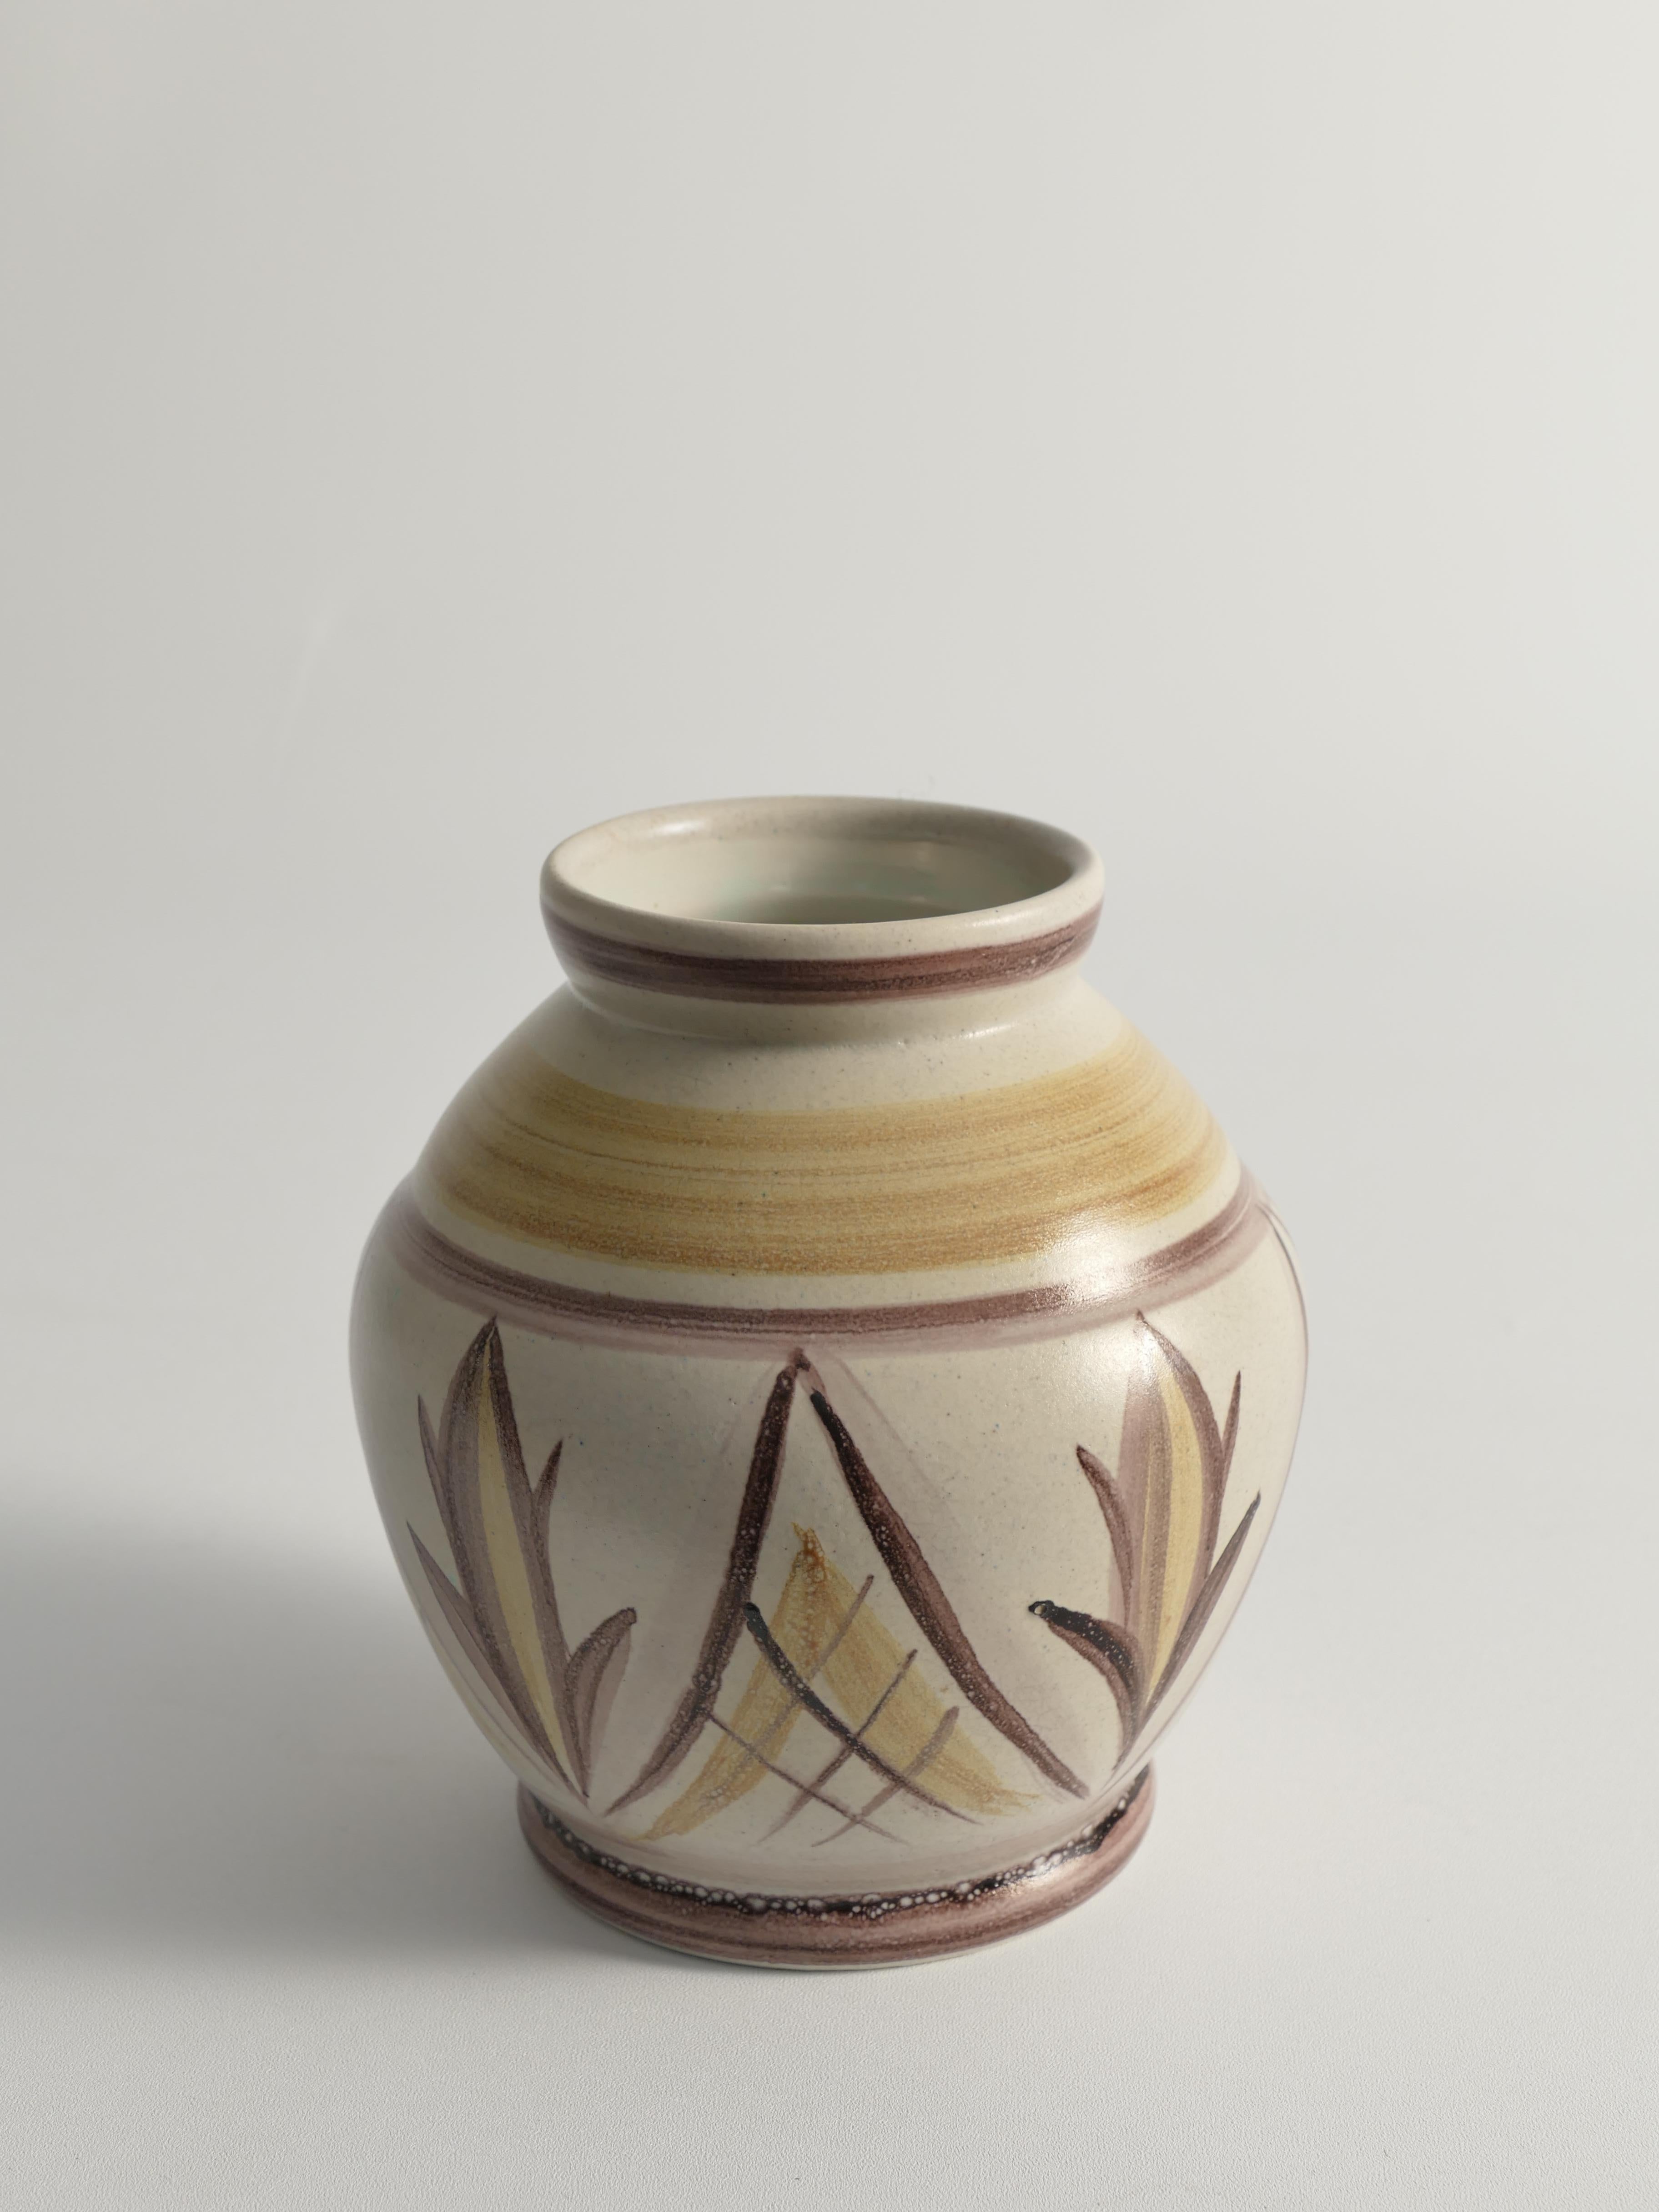 Mid-20th Century Swedish Folk Art Bulb Vase with Floral Motif by Maggie Wibom for Bo Fajans, 1930 For Sale